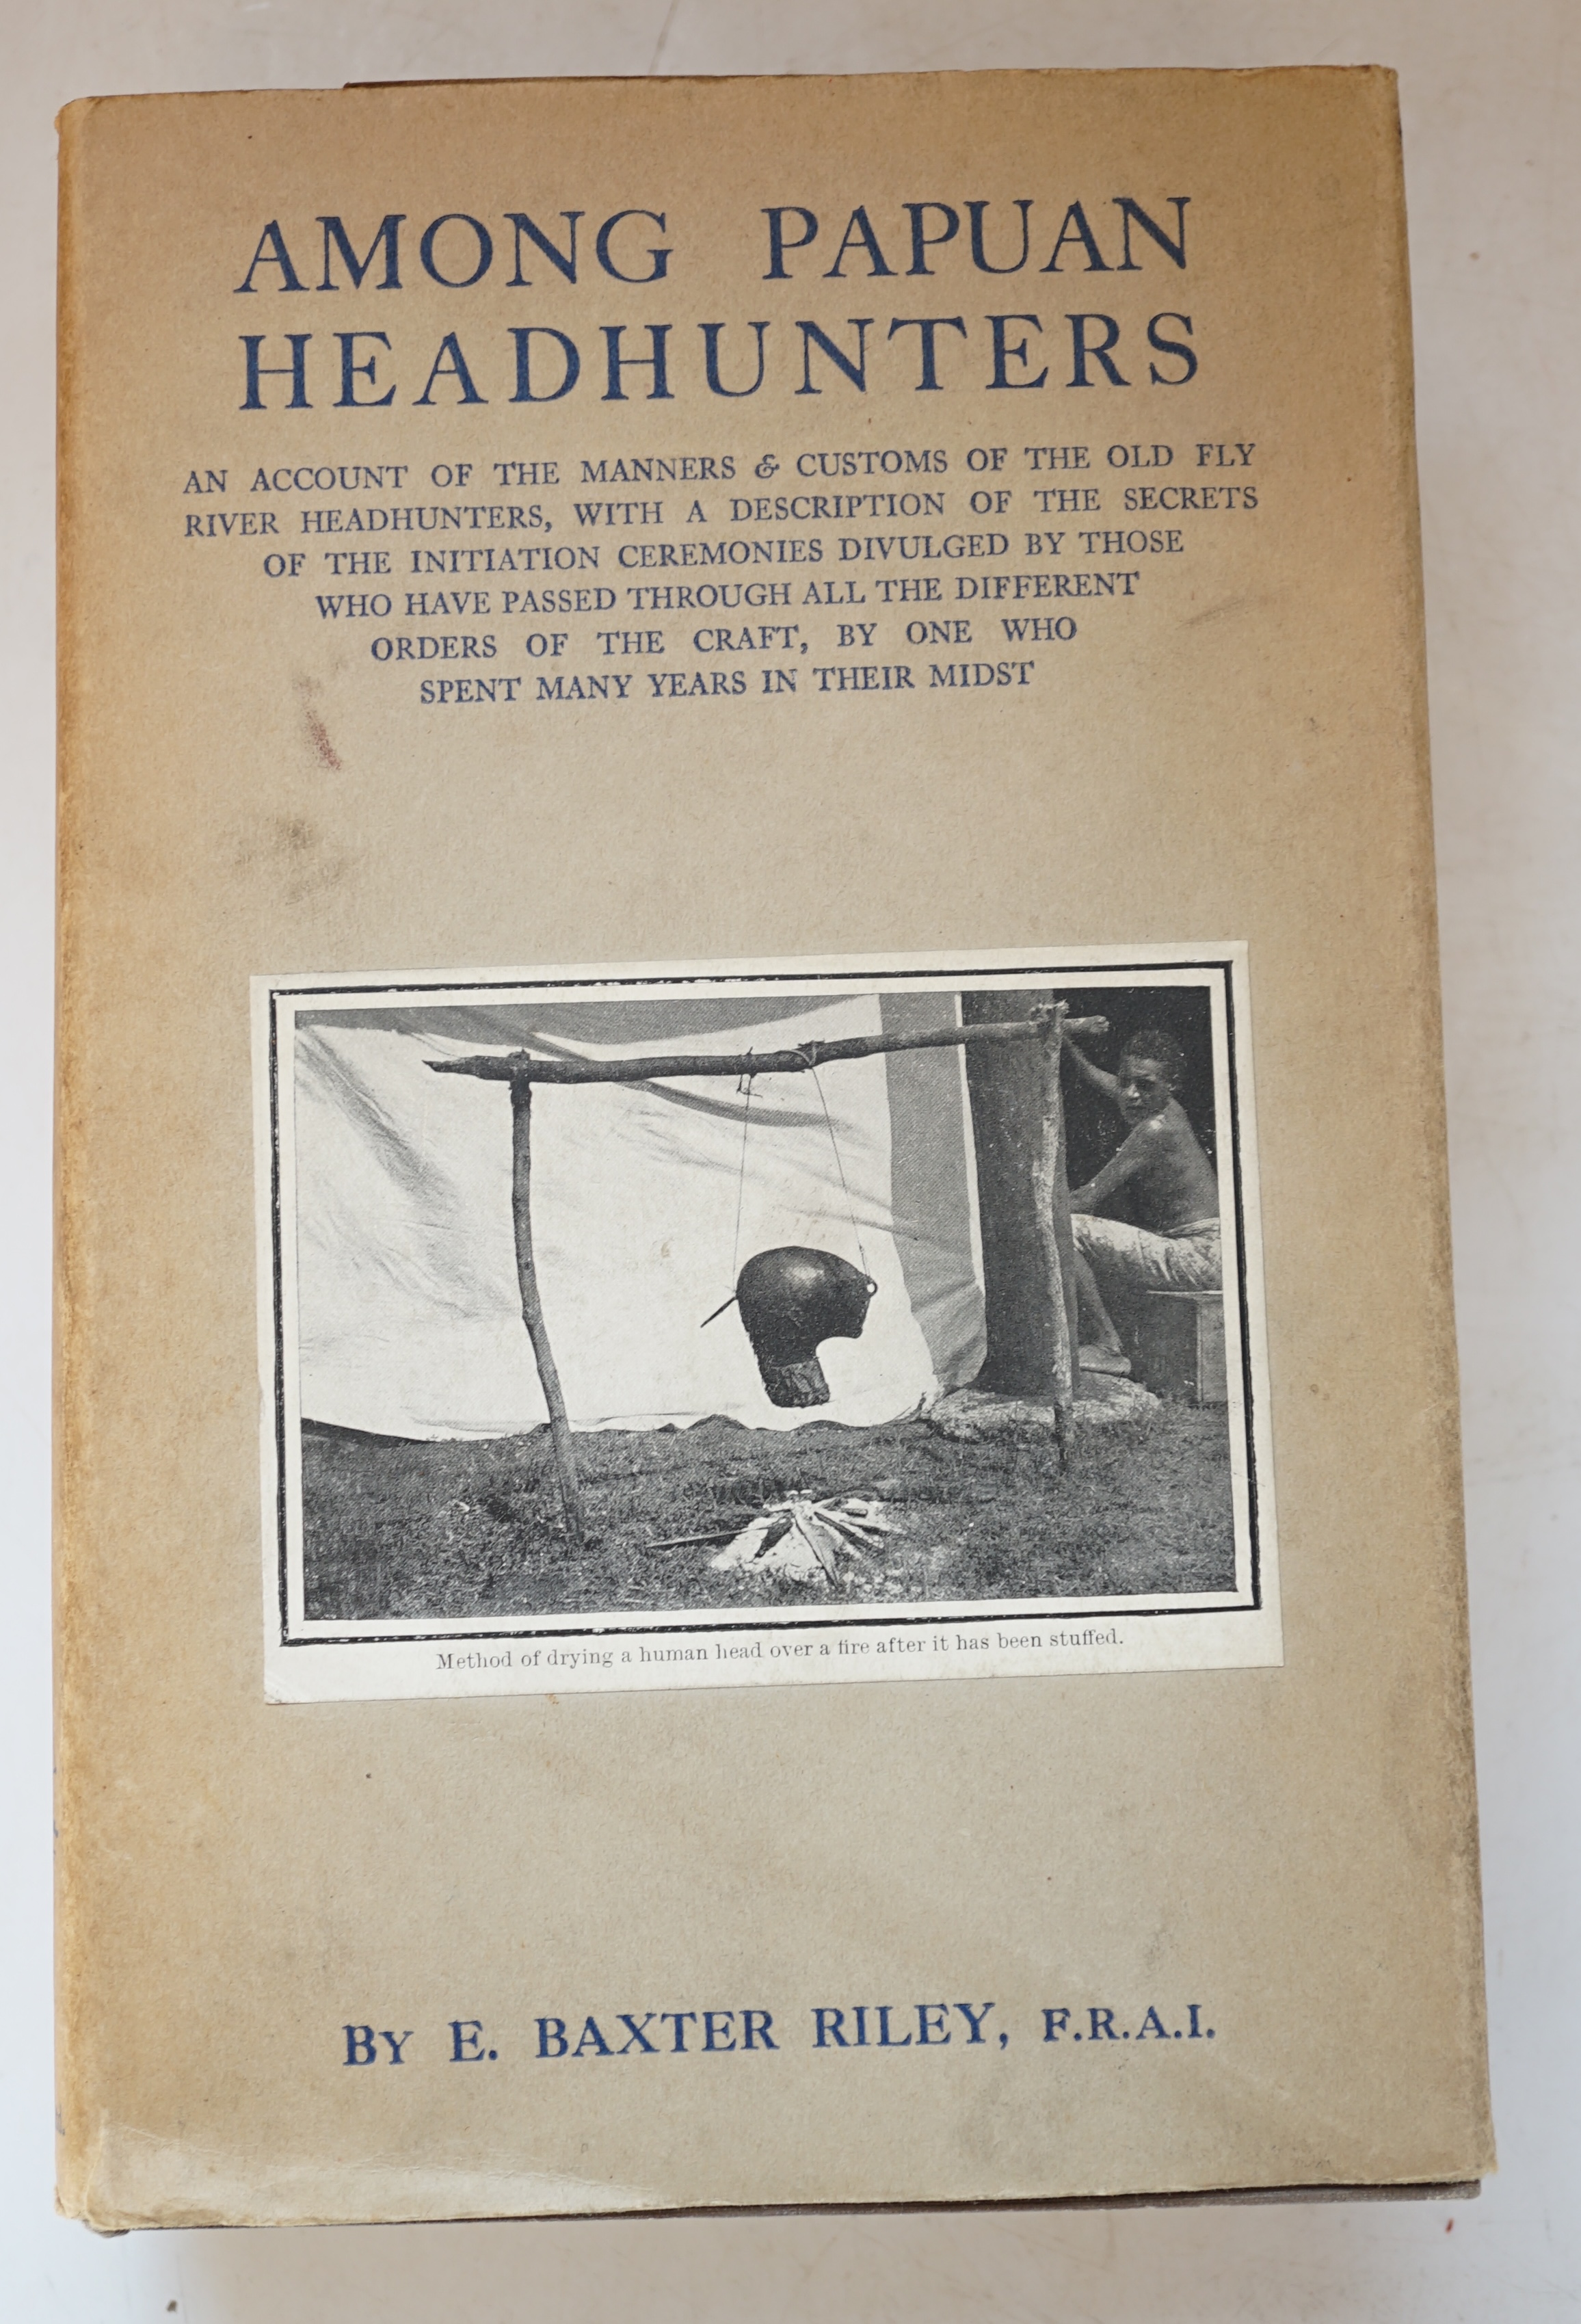 Riley, E.Baxter - Among Papuan Headhunters. An account of the manners and customs of the old Fly river headhunters, with a description of the secrets of the initiation ceremonies divulged by those who have passed through